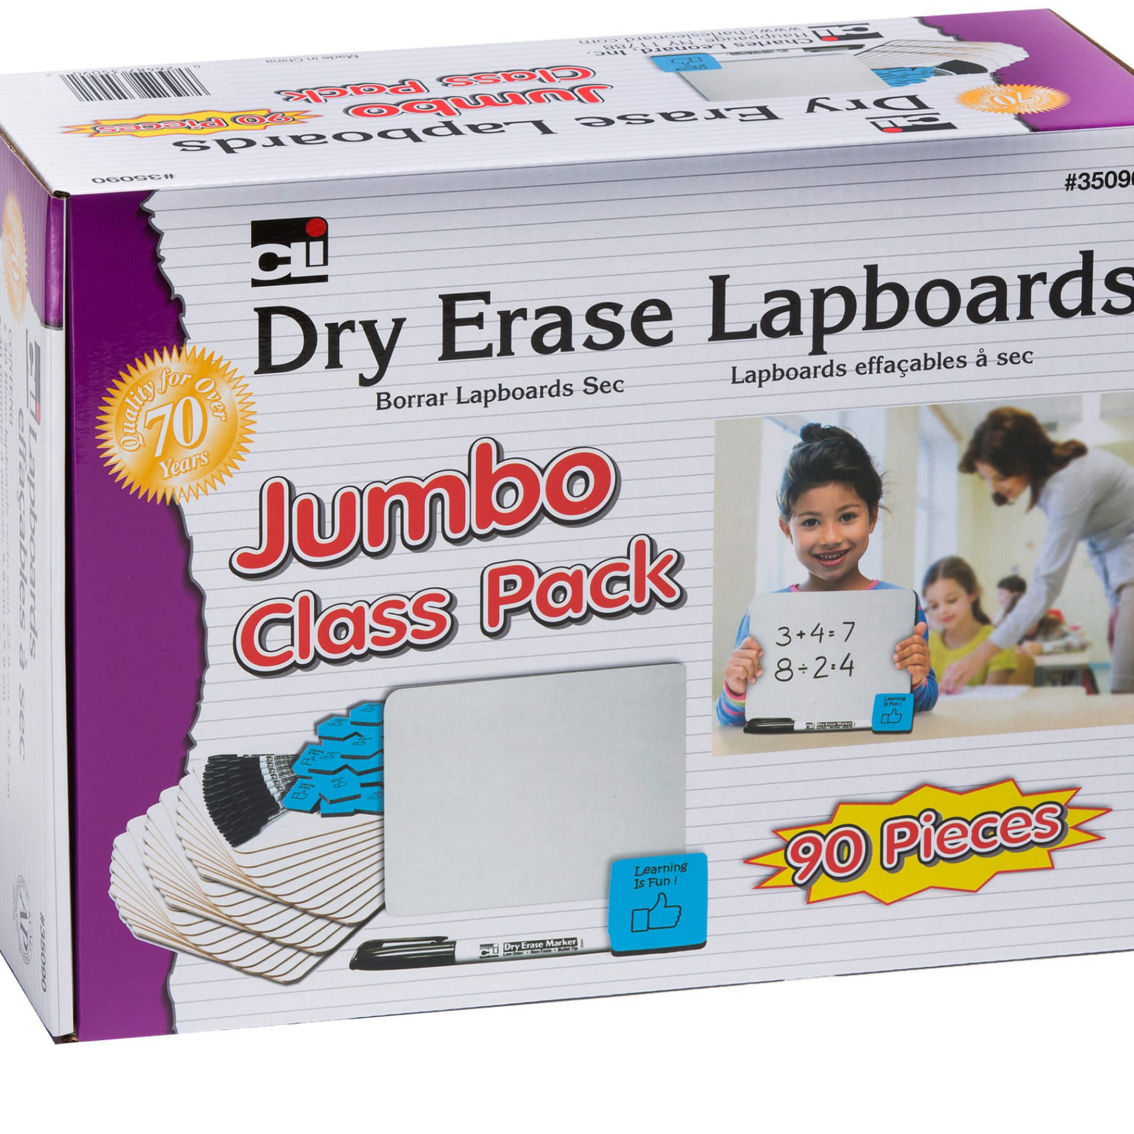 Charles Leonard Dry Erase Board Class Pack, 30 Each of Boards, Markers, & Erasers - Image 2 of 5